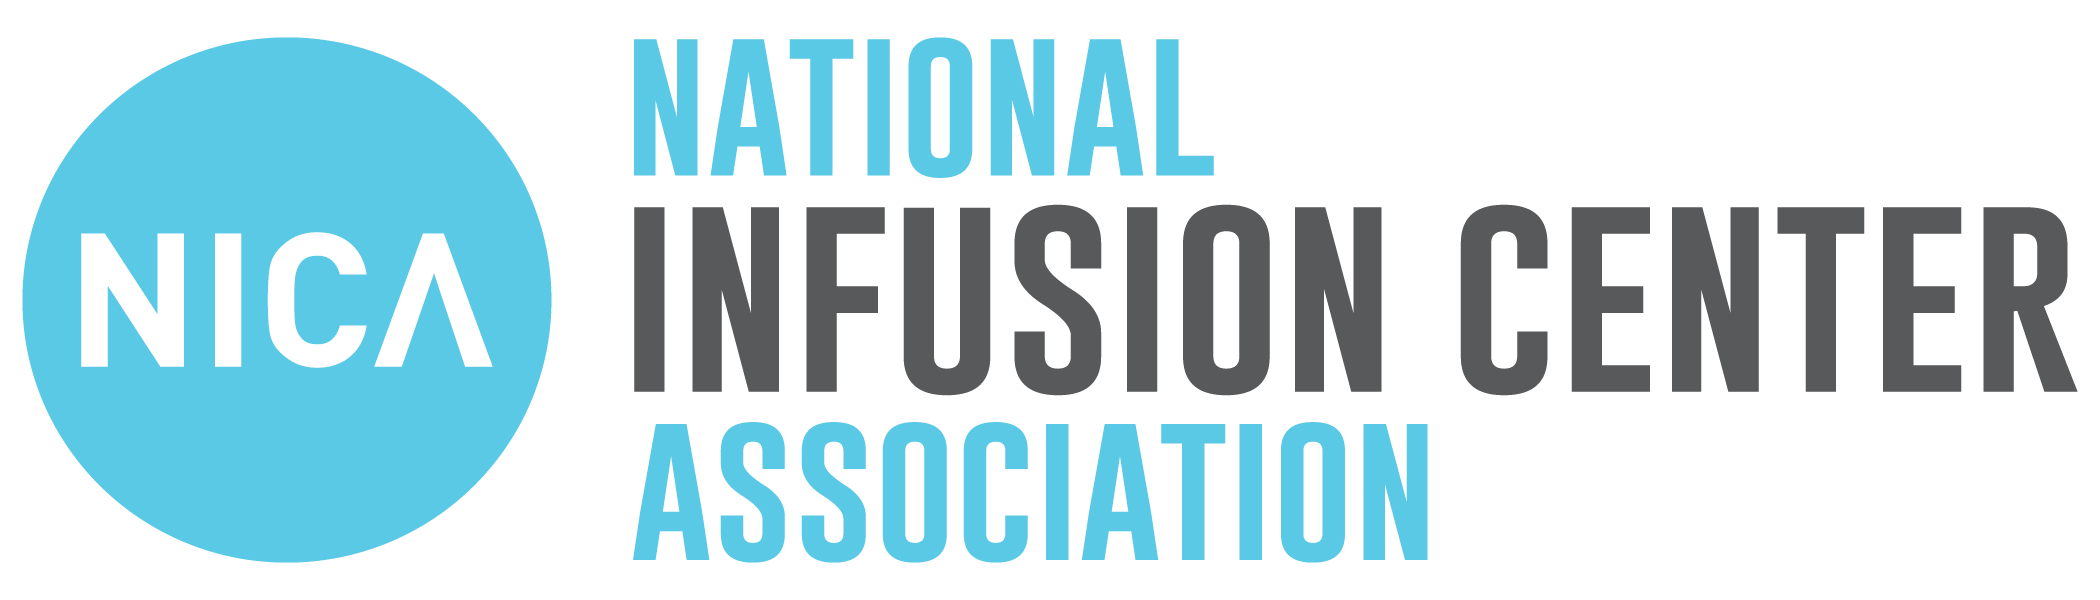 national infusion center logo